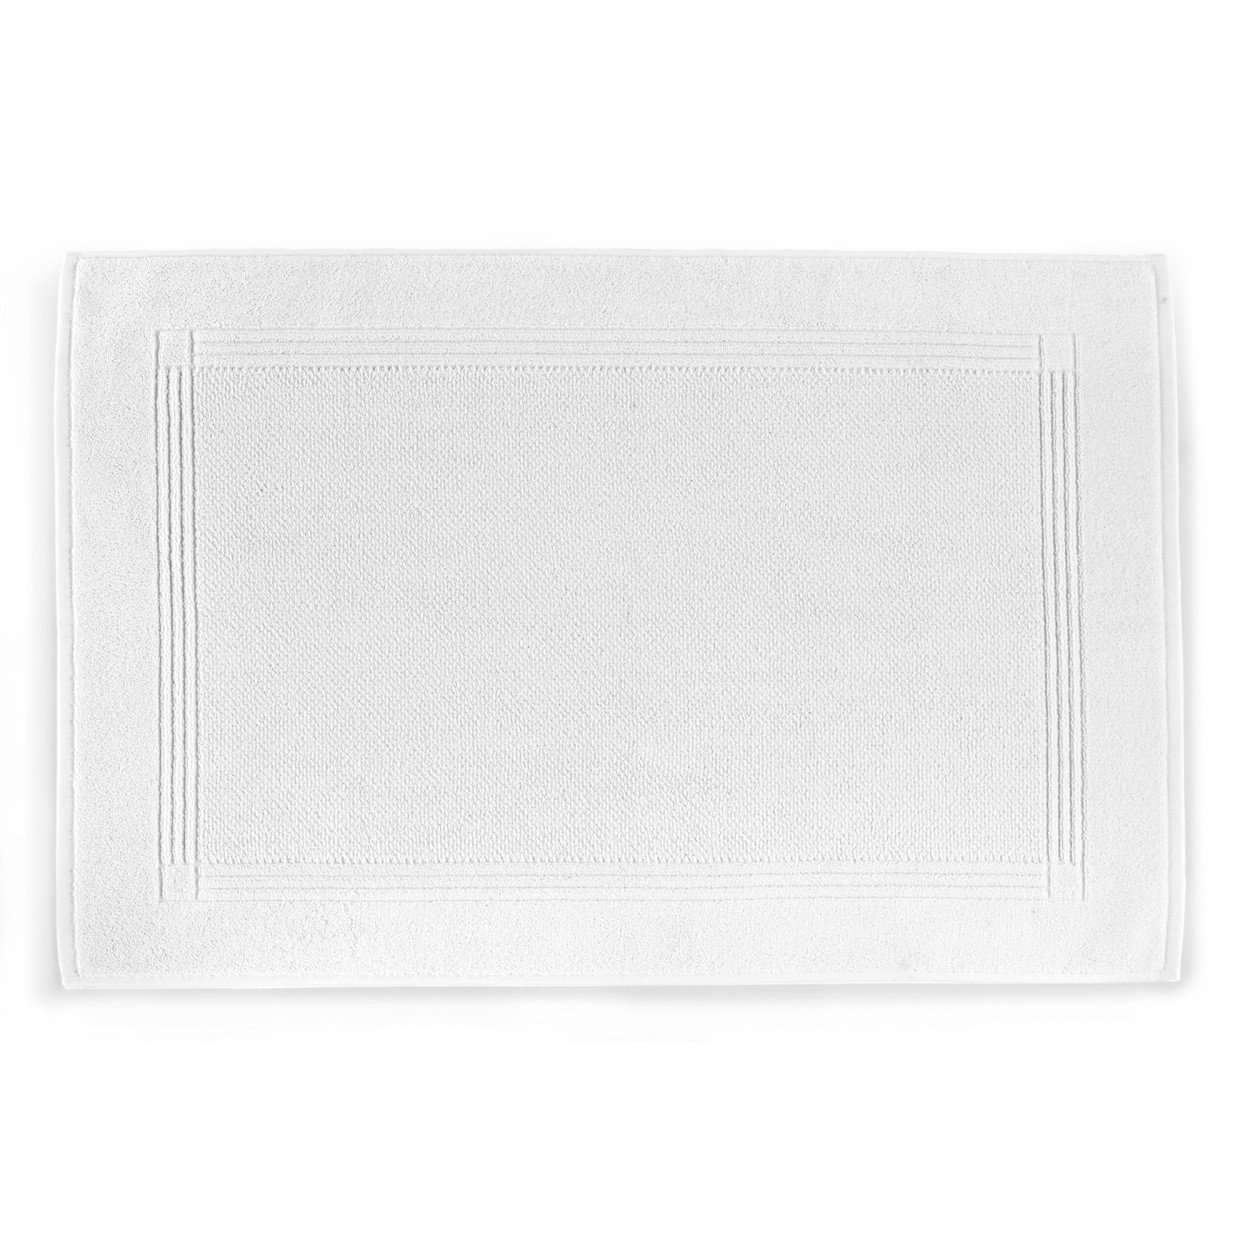 Towels Jubilee Bath Collection by Peacock Alley Mat 22x34 / White Peacock Alley